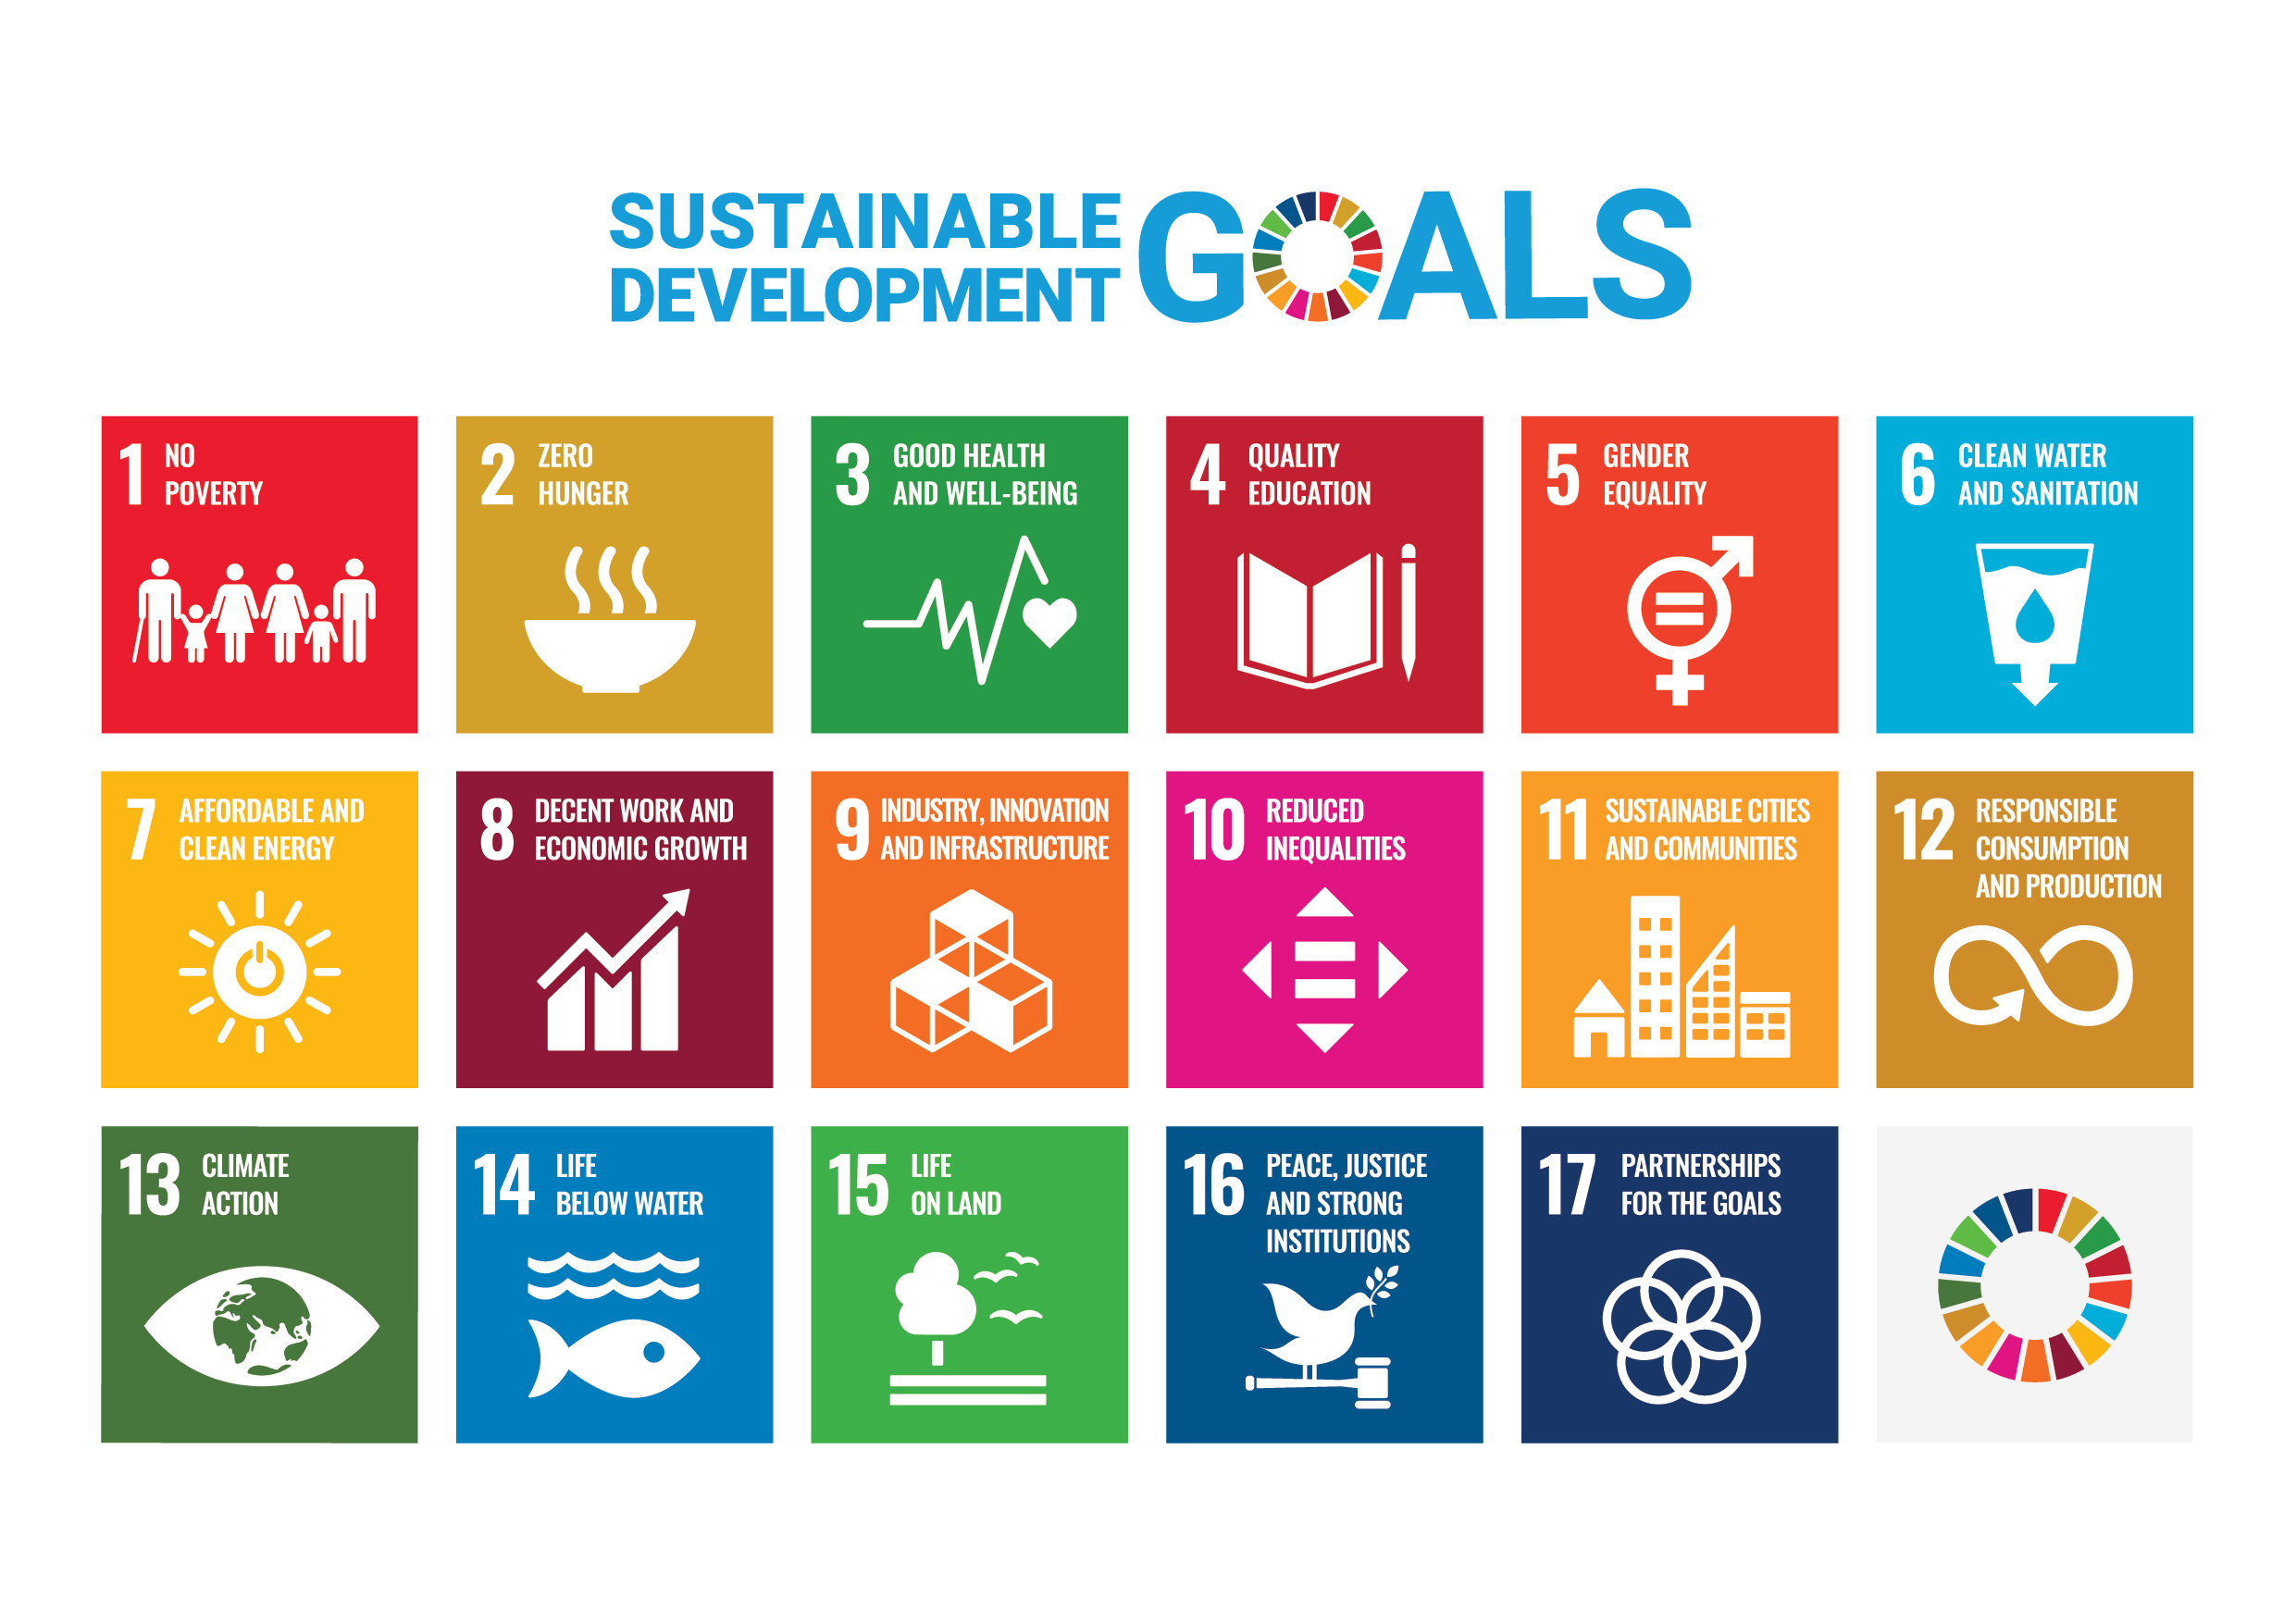 The Sustainable Development Goals (SDGs), otherwise known as the Global Goals, are a universal call to action to end poverty, protect the planet and ensure that all people enjoy peace and prosperity.